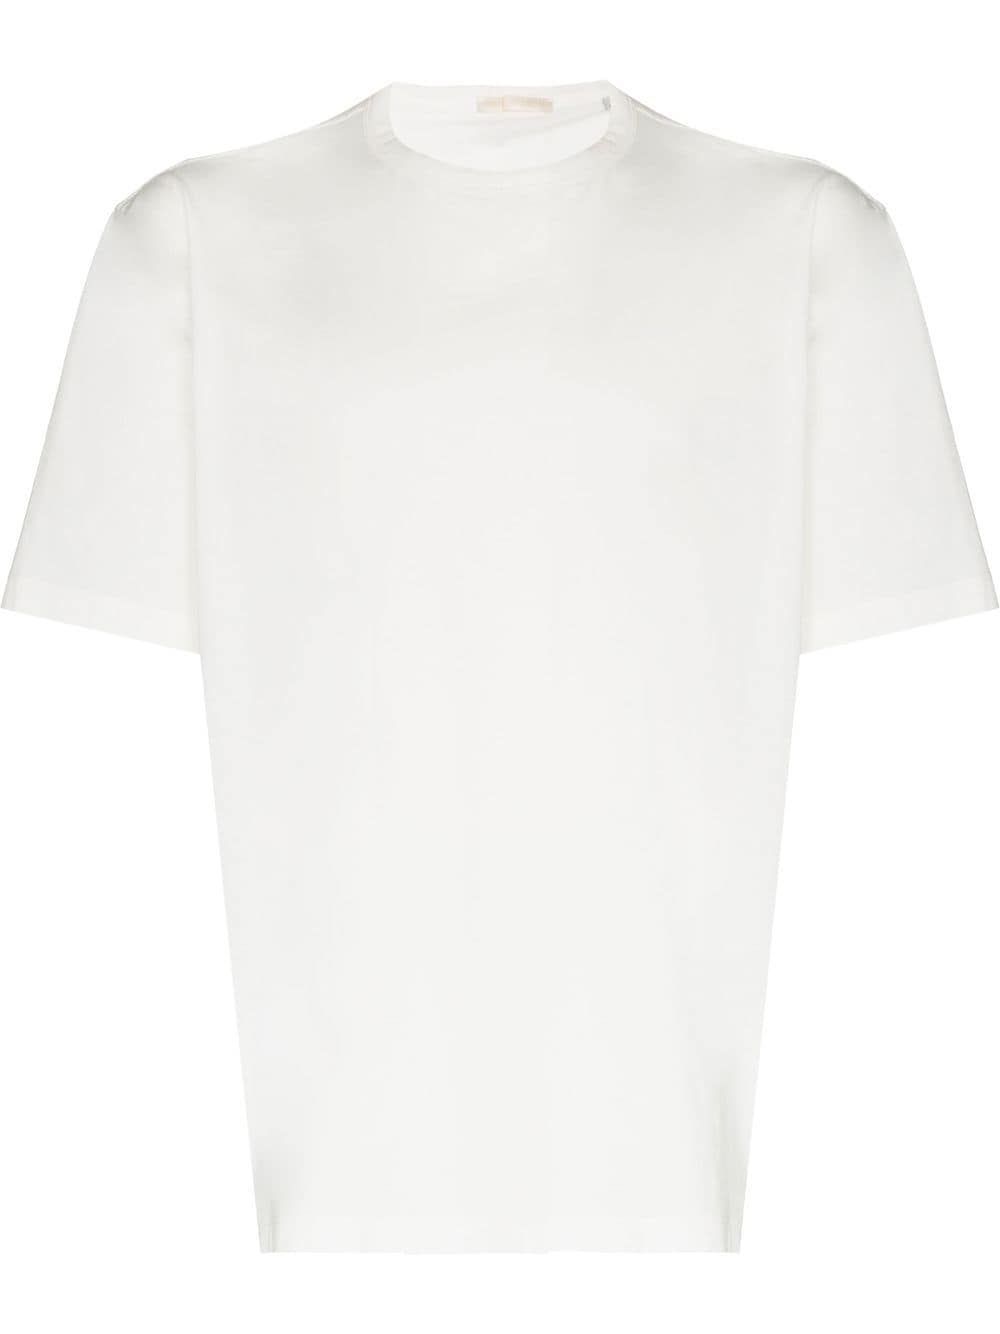 OUR LEGACY-NEW BOX T-SHIRT-M2206NW WHITE CLEAN JERSEY